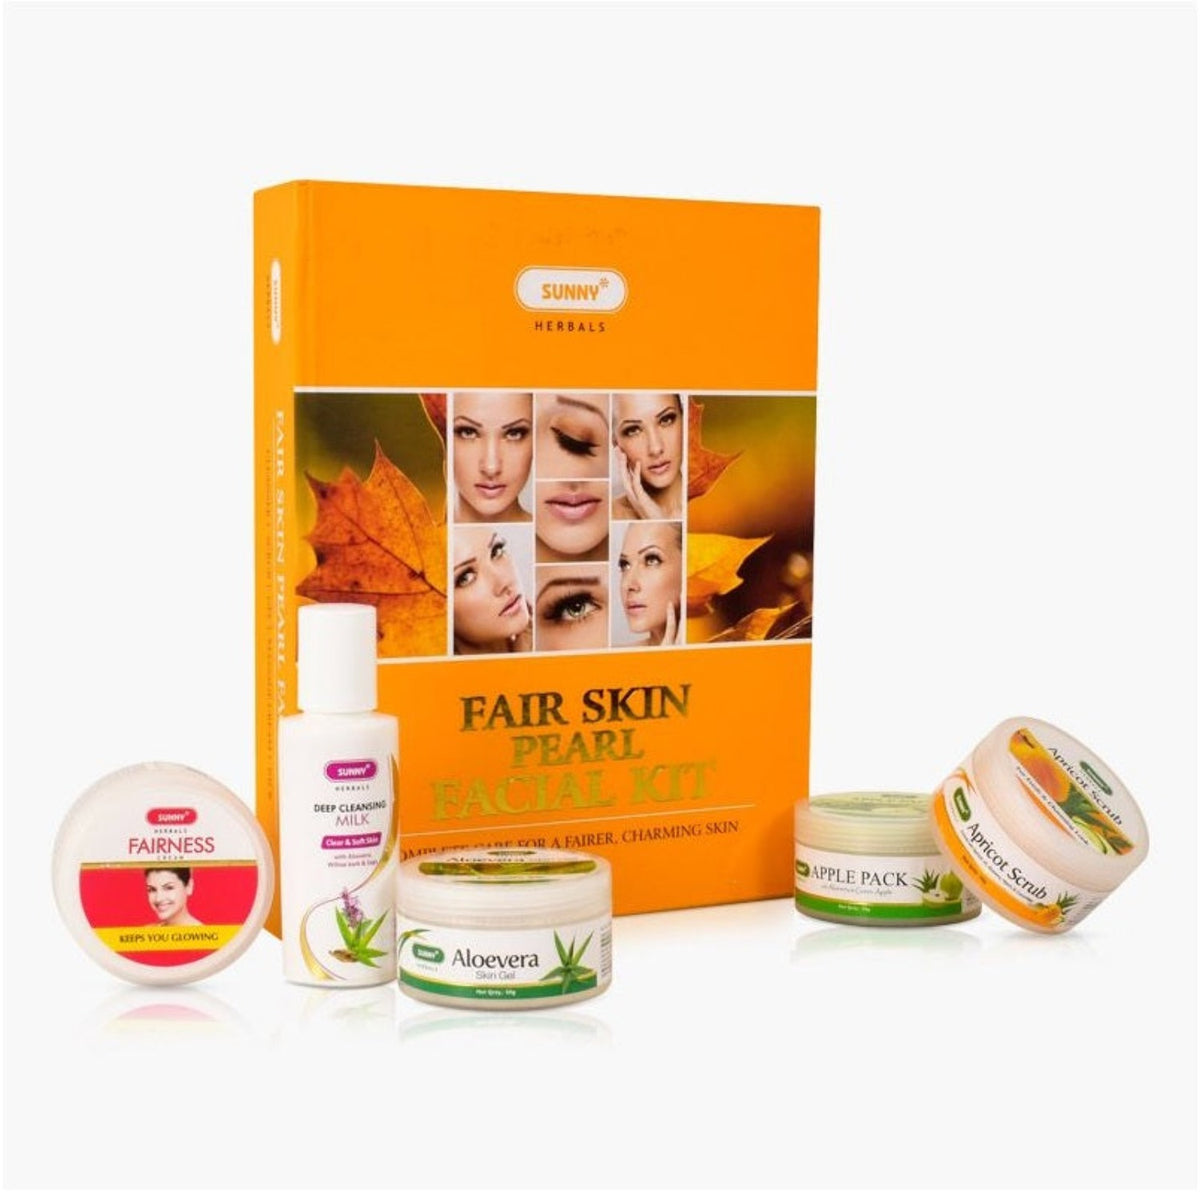 Bakson's Sunny Herbals Fair Skin Pearl Facial Complete Care For a Fairer,Charming Skin Kit 5 X 50 (Gm/Ml)